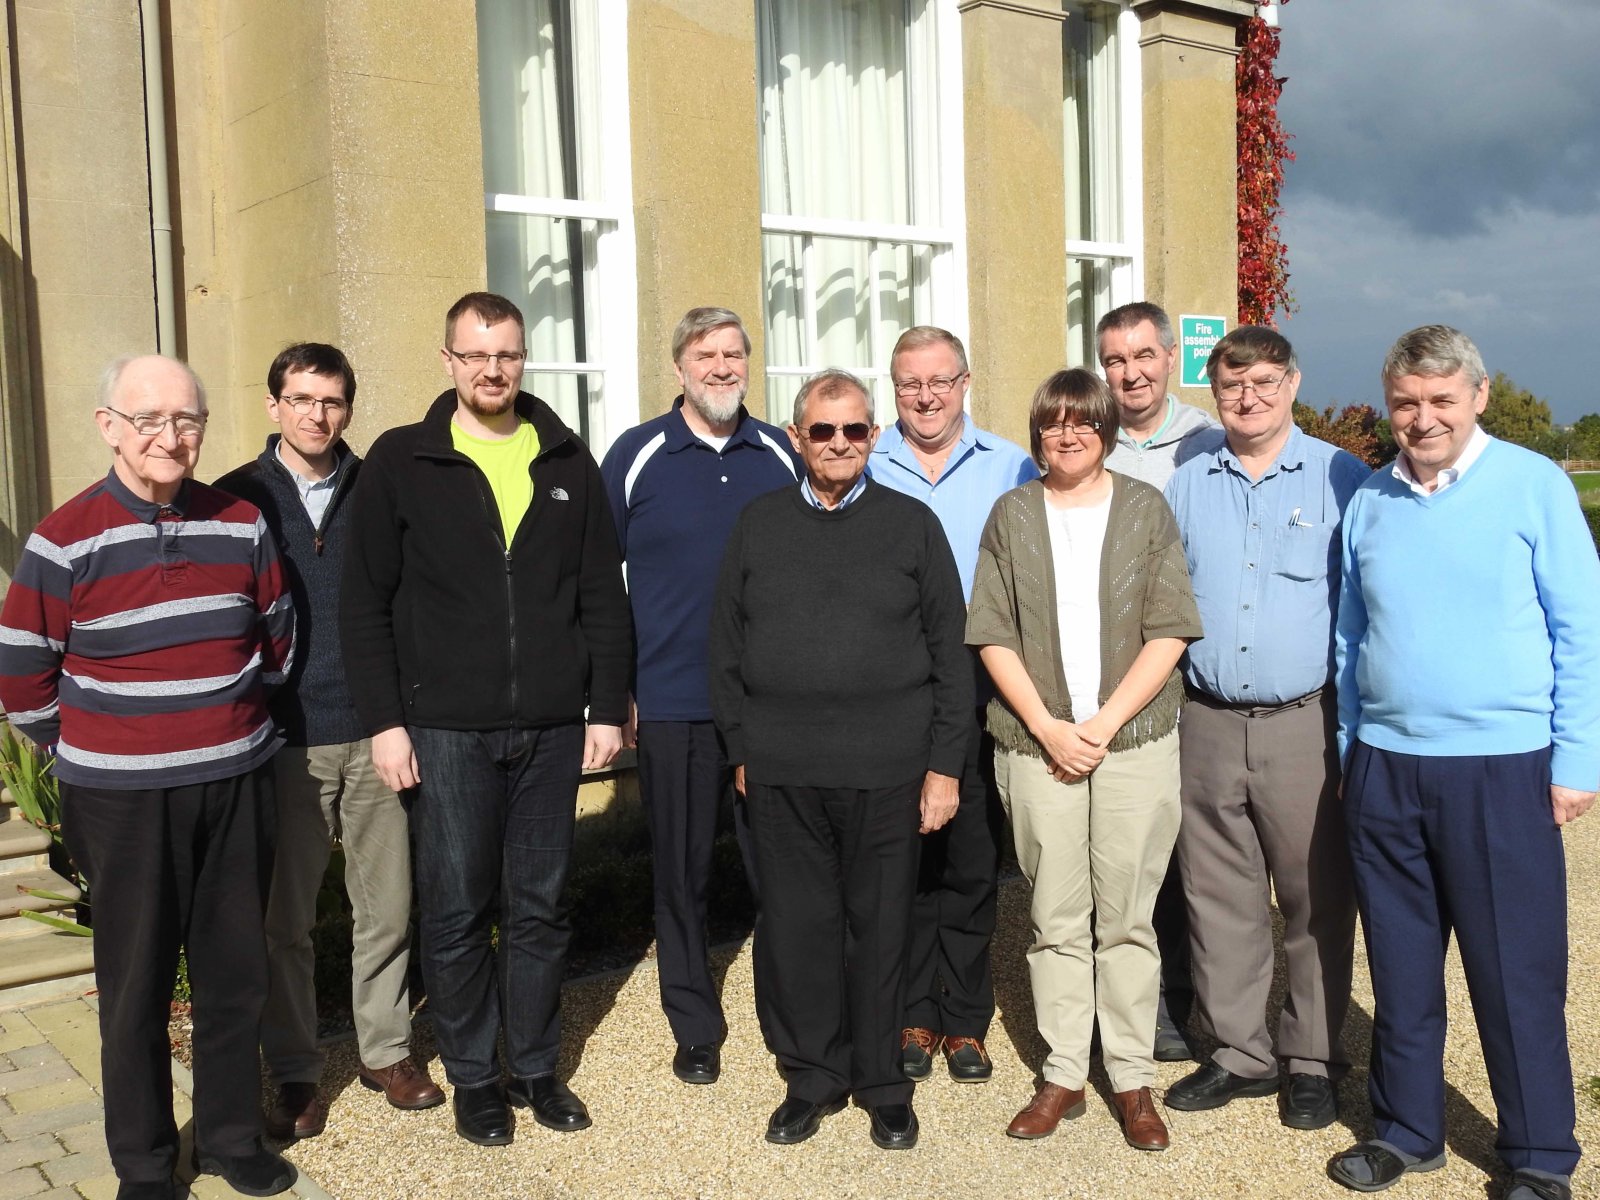 MEETING OF SALESIANS IN PARISH MINISTRY